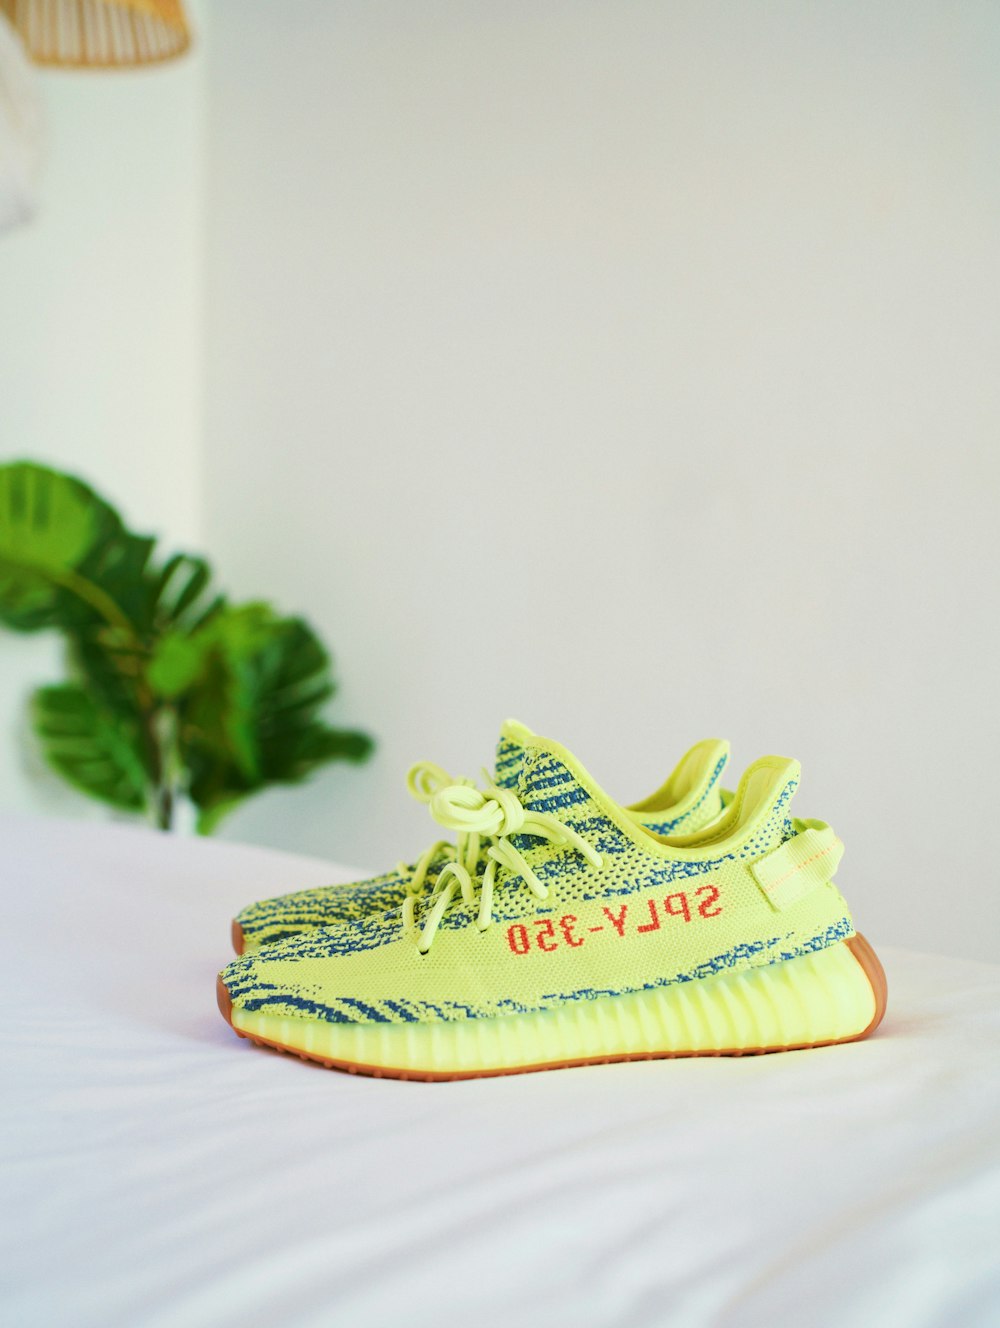 frozen yellow Adidas Yeezy Boost v2's on white bedspread